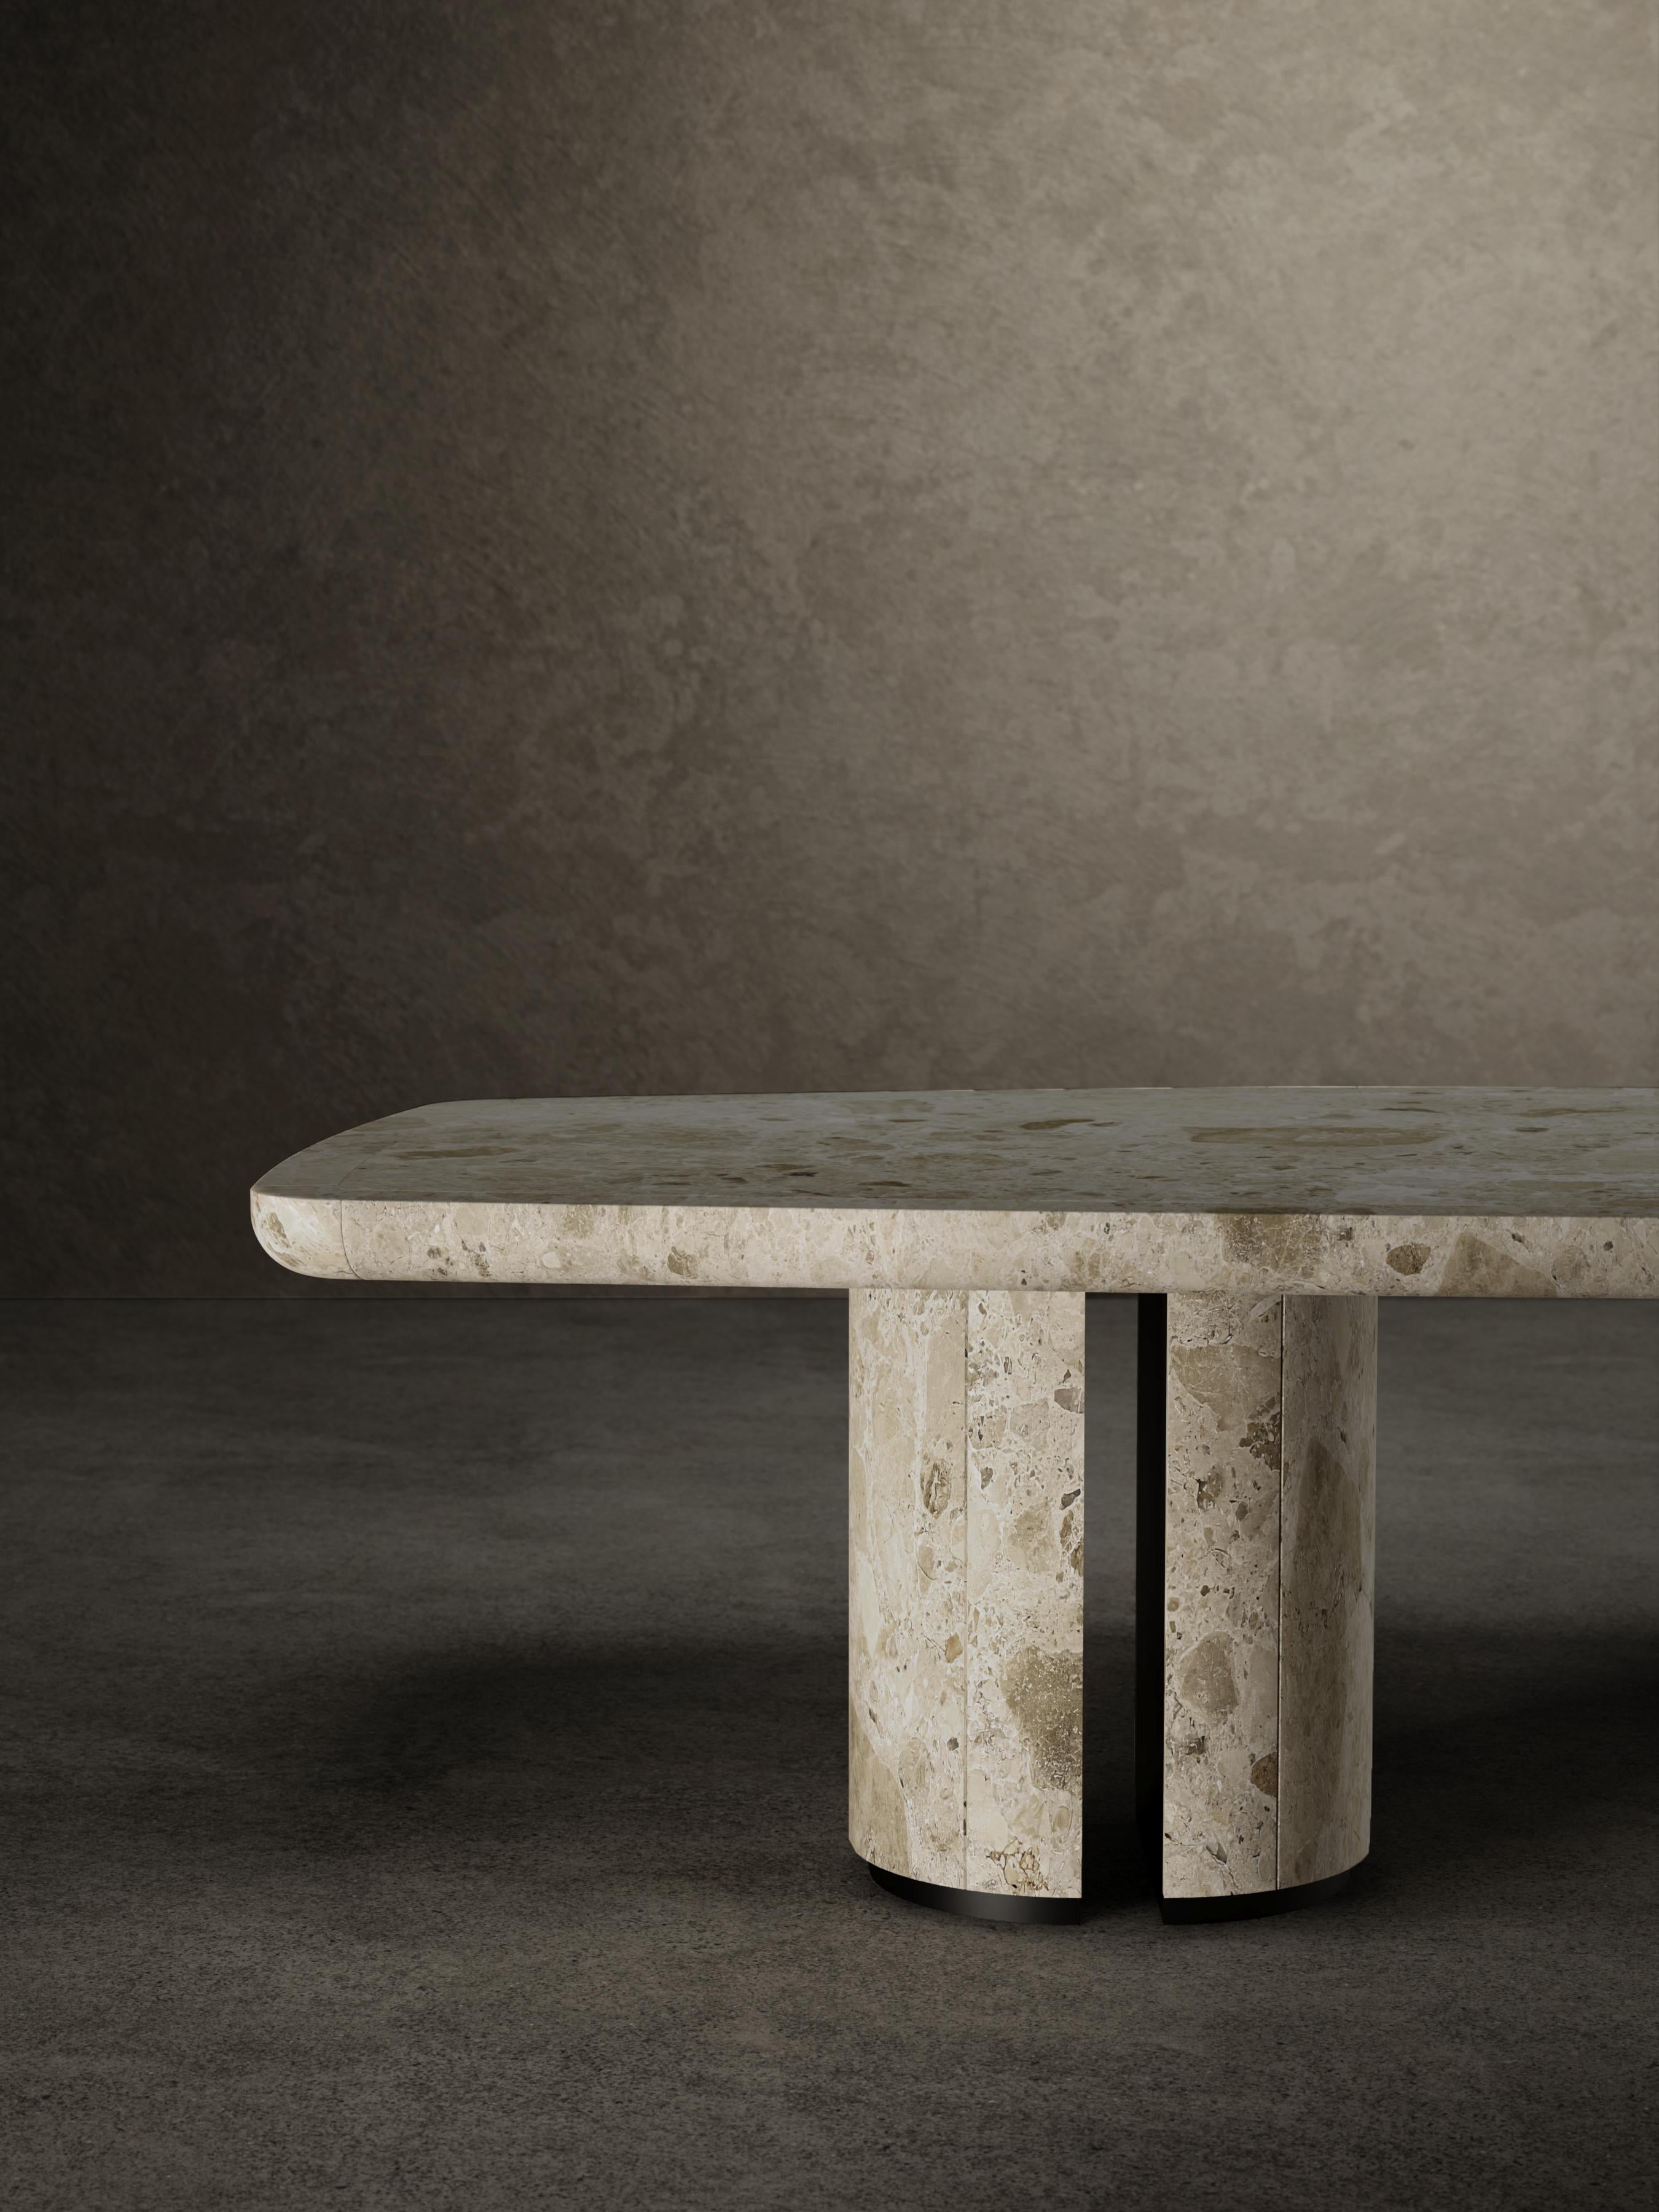 For No One dining table has a top made up of a supported matte Ambrosia marble slab with a solid marble frame.
The top is anchored to the two bases by matte black metal plates. Each base is made up of two half-cylinders in
matt-finishing Ambrosia